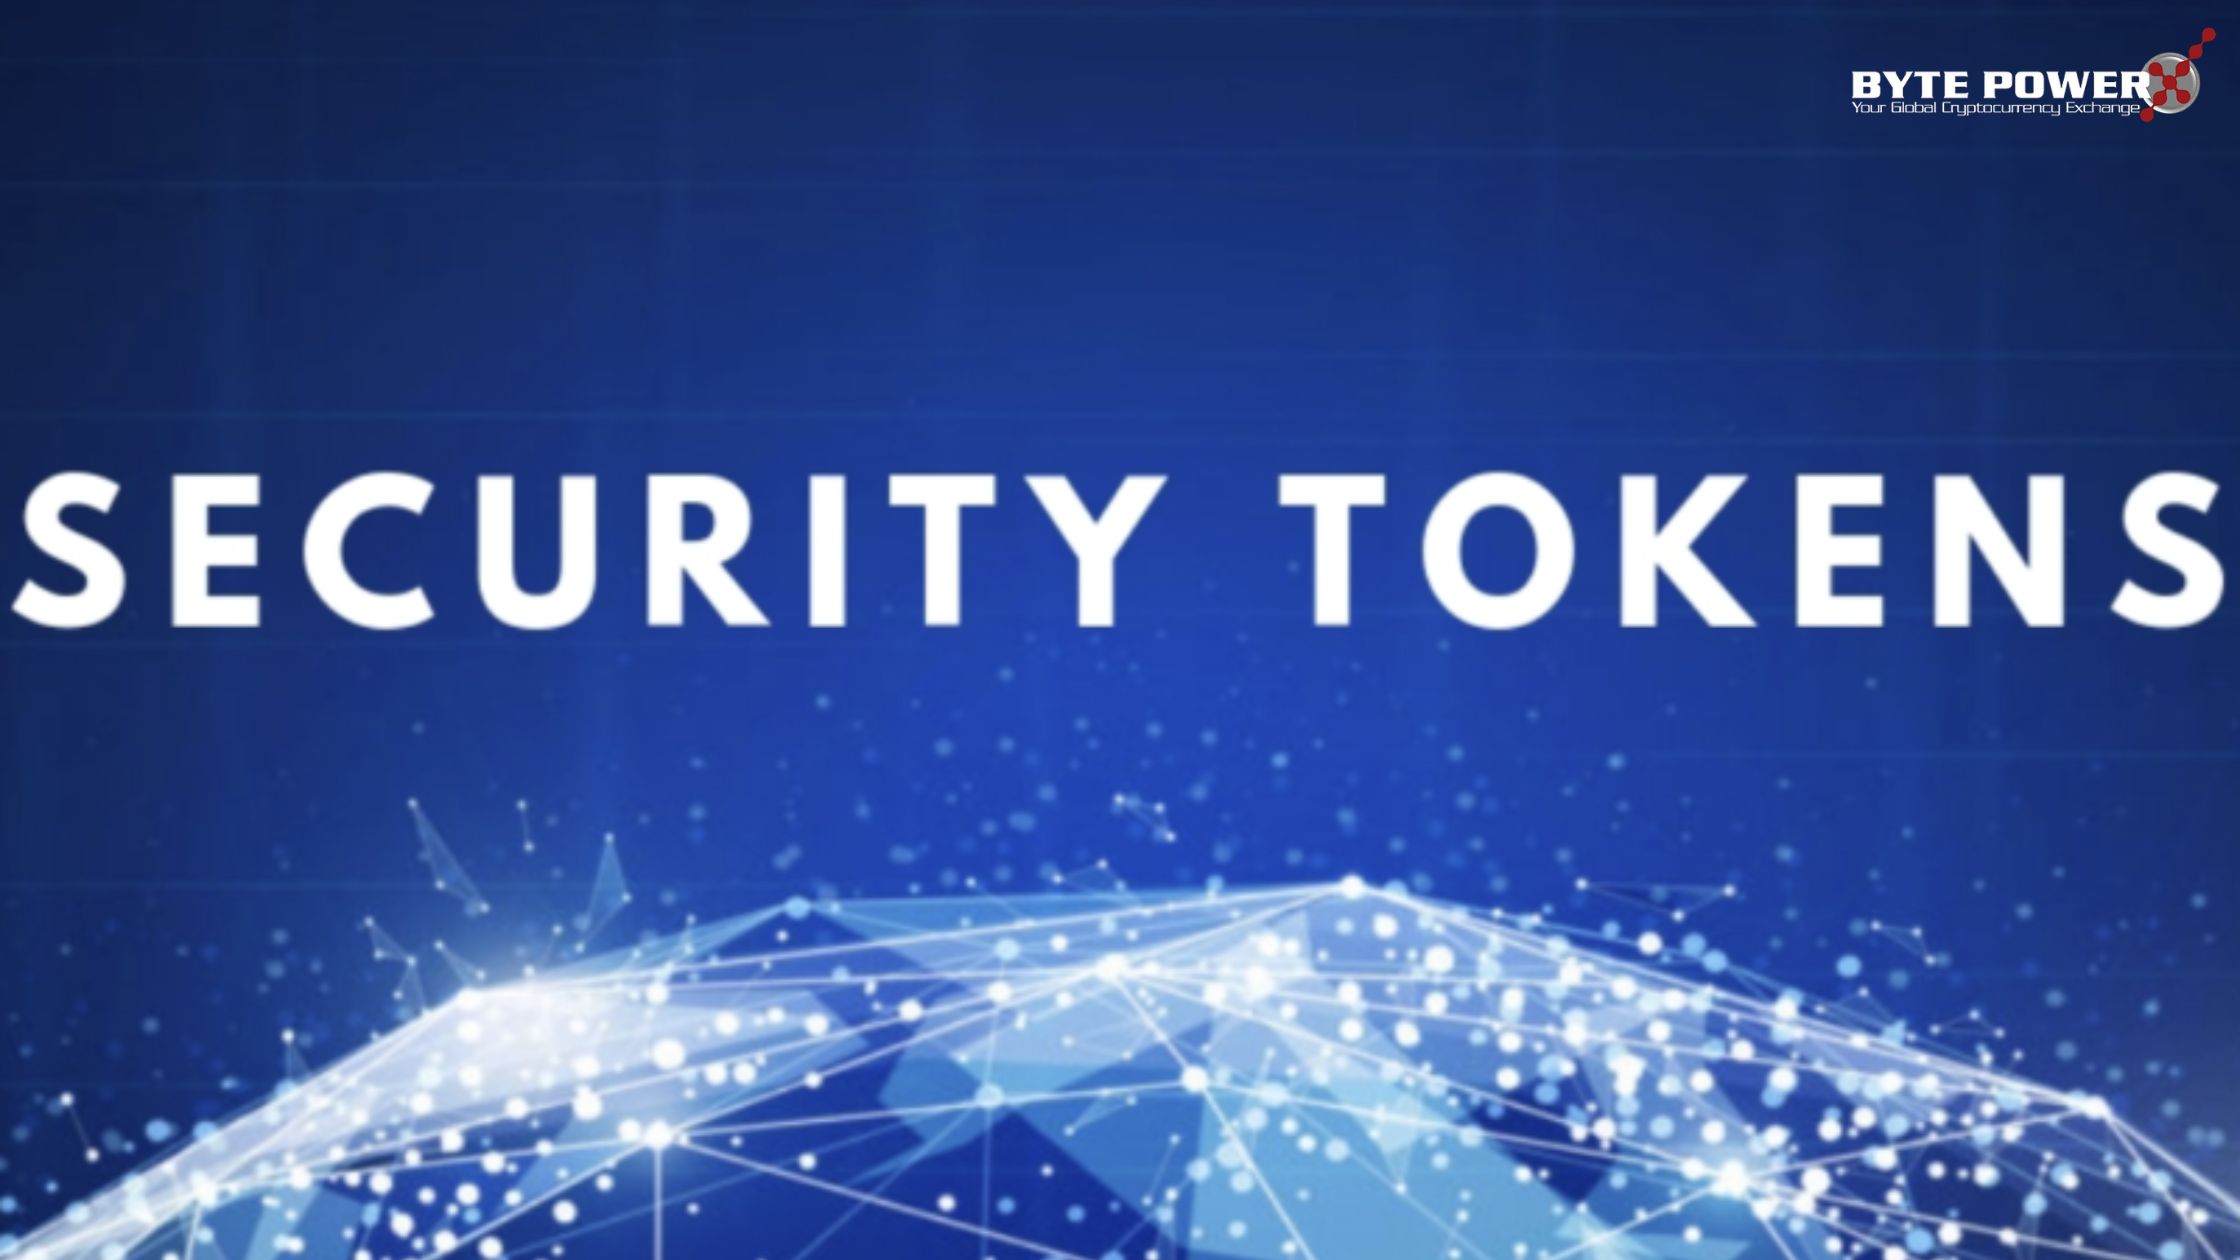 Why are security tokens important